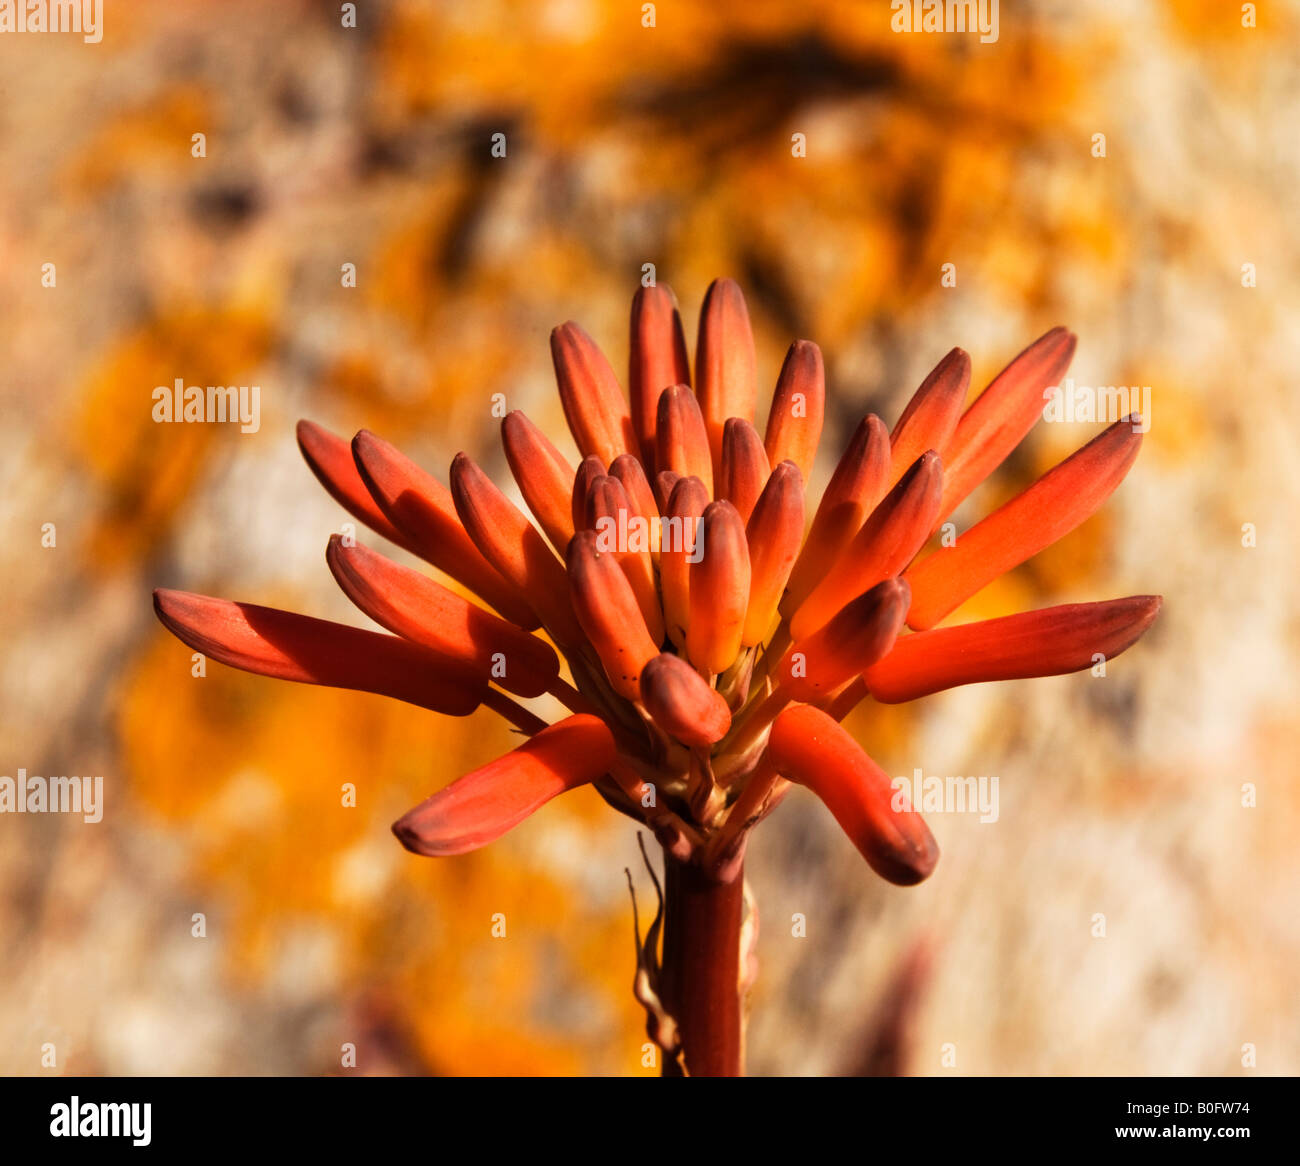 Red hot poker flowers blooming,Portugal,Europe Stock Photo